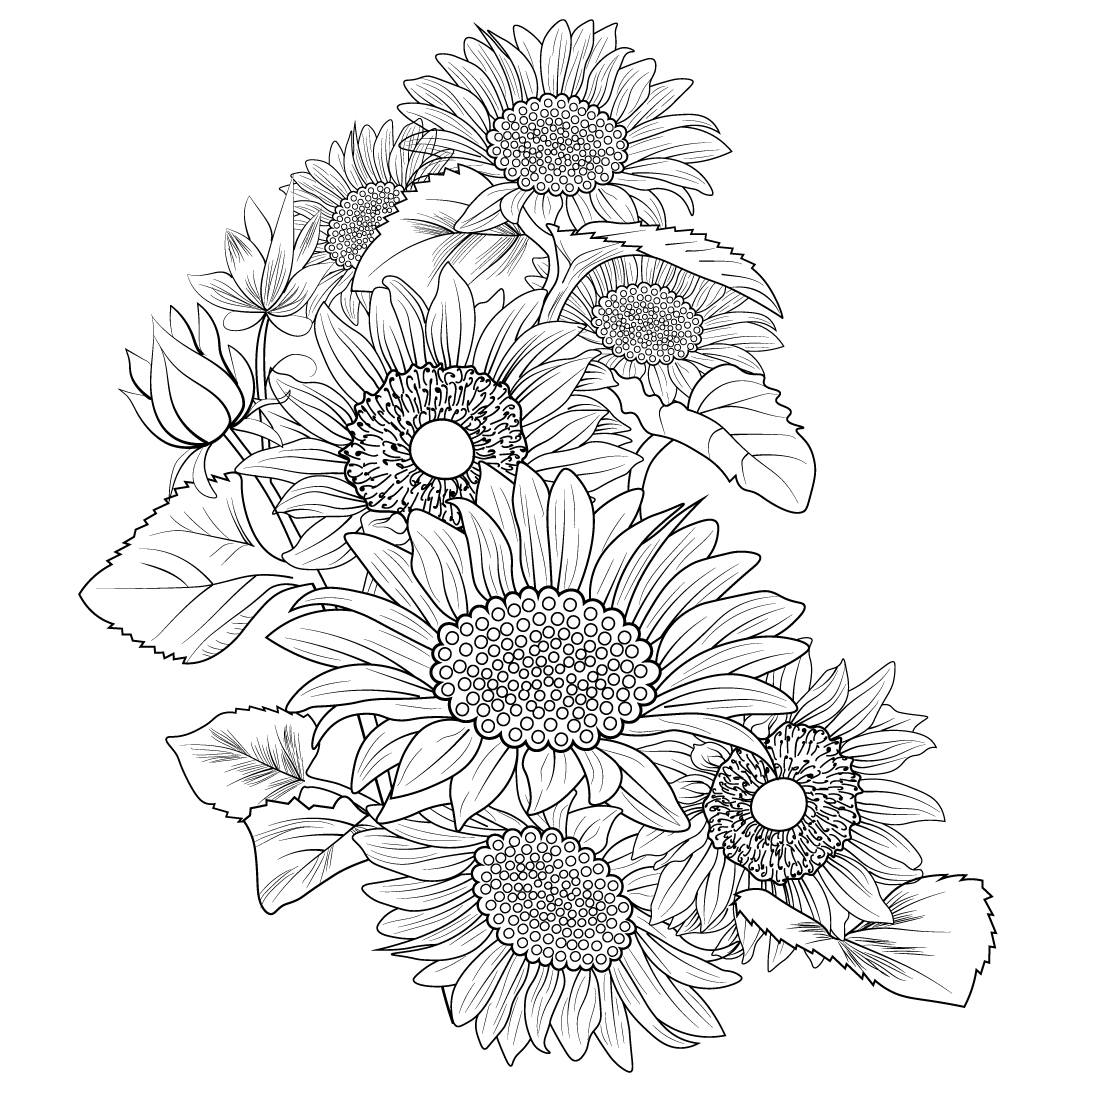 Sunflower Line Art - Add a Simple and Elegant Touch to Your Designs